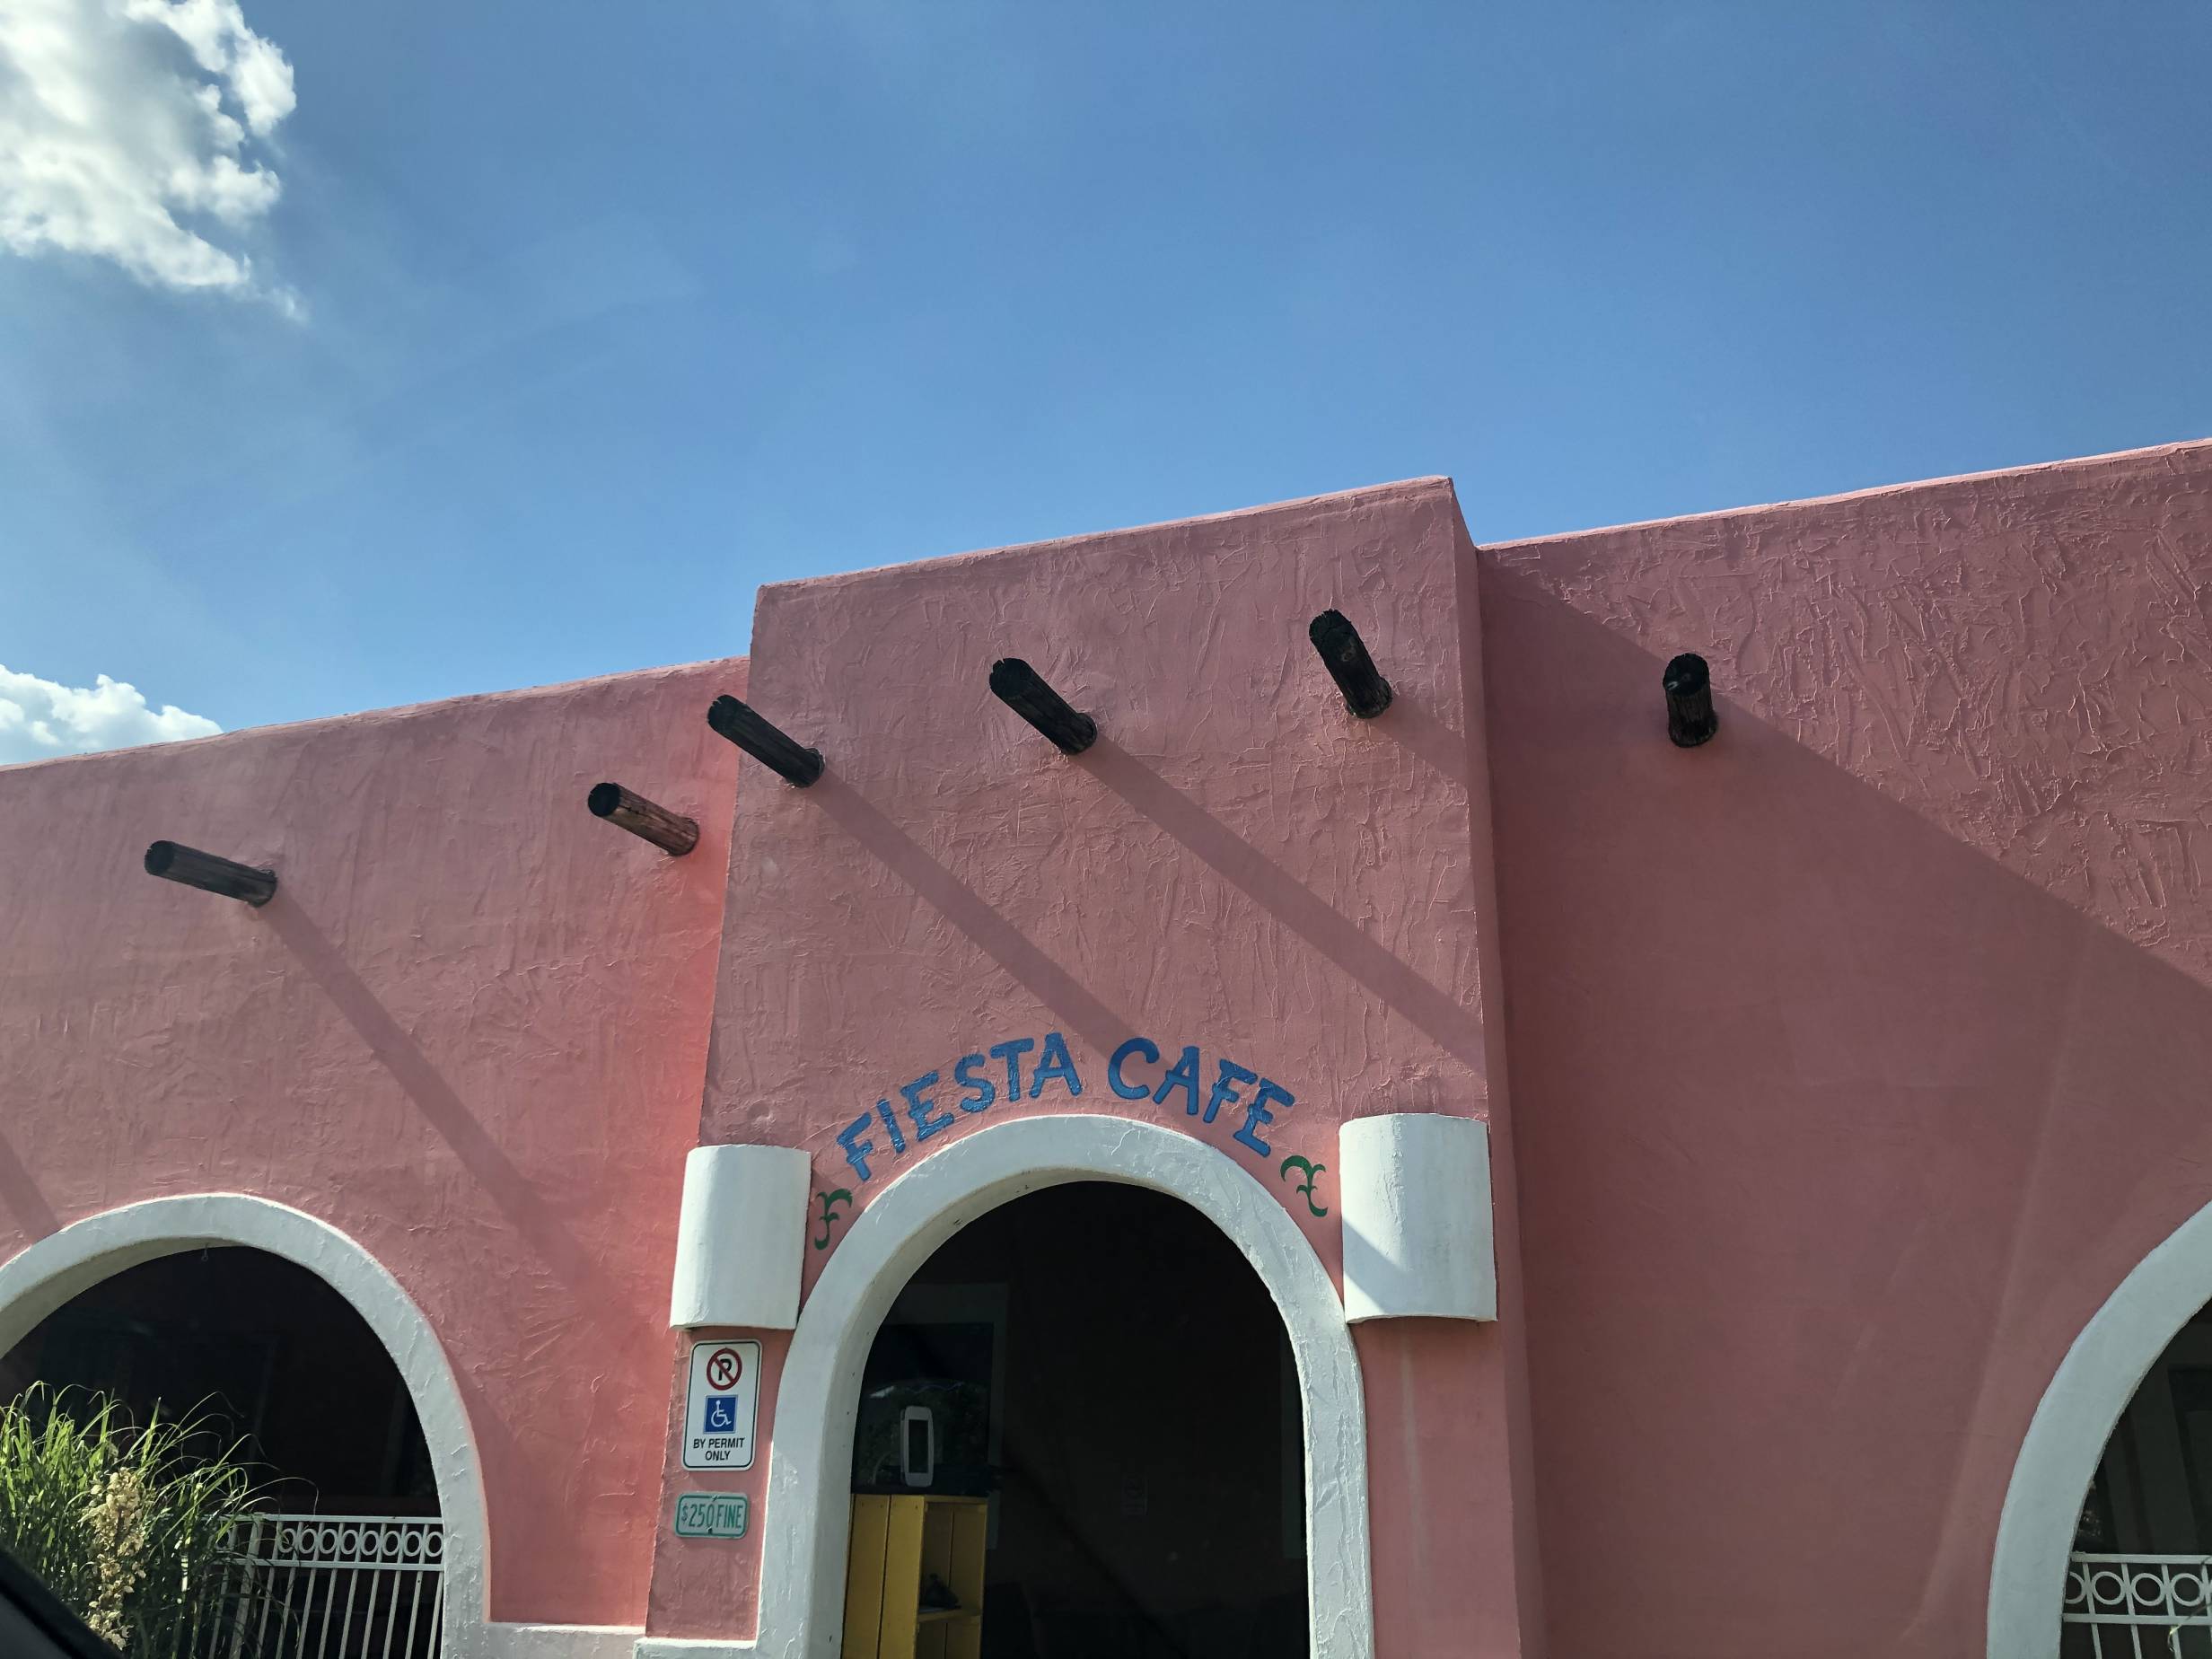 Amy Myers talks margaritas, tacos, and the 32 year history of Fiesta Cafe